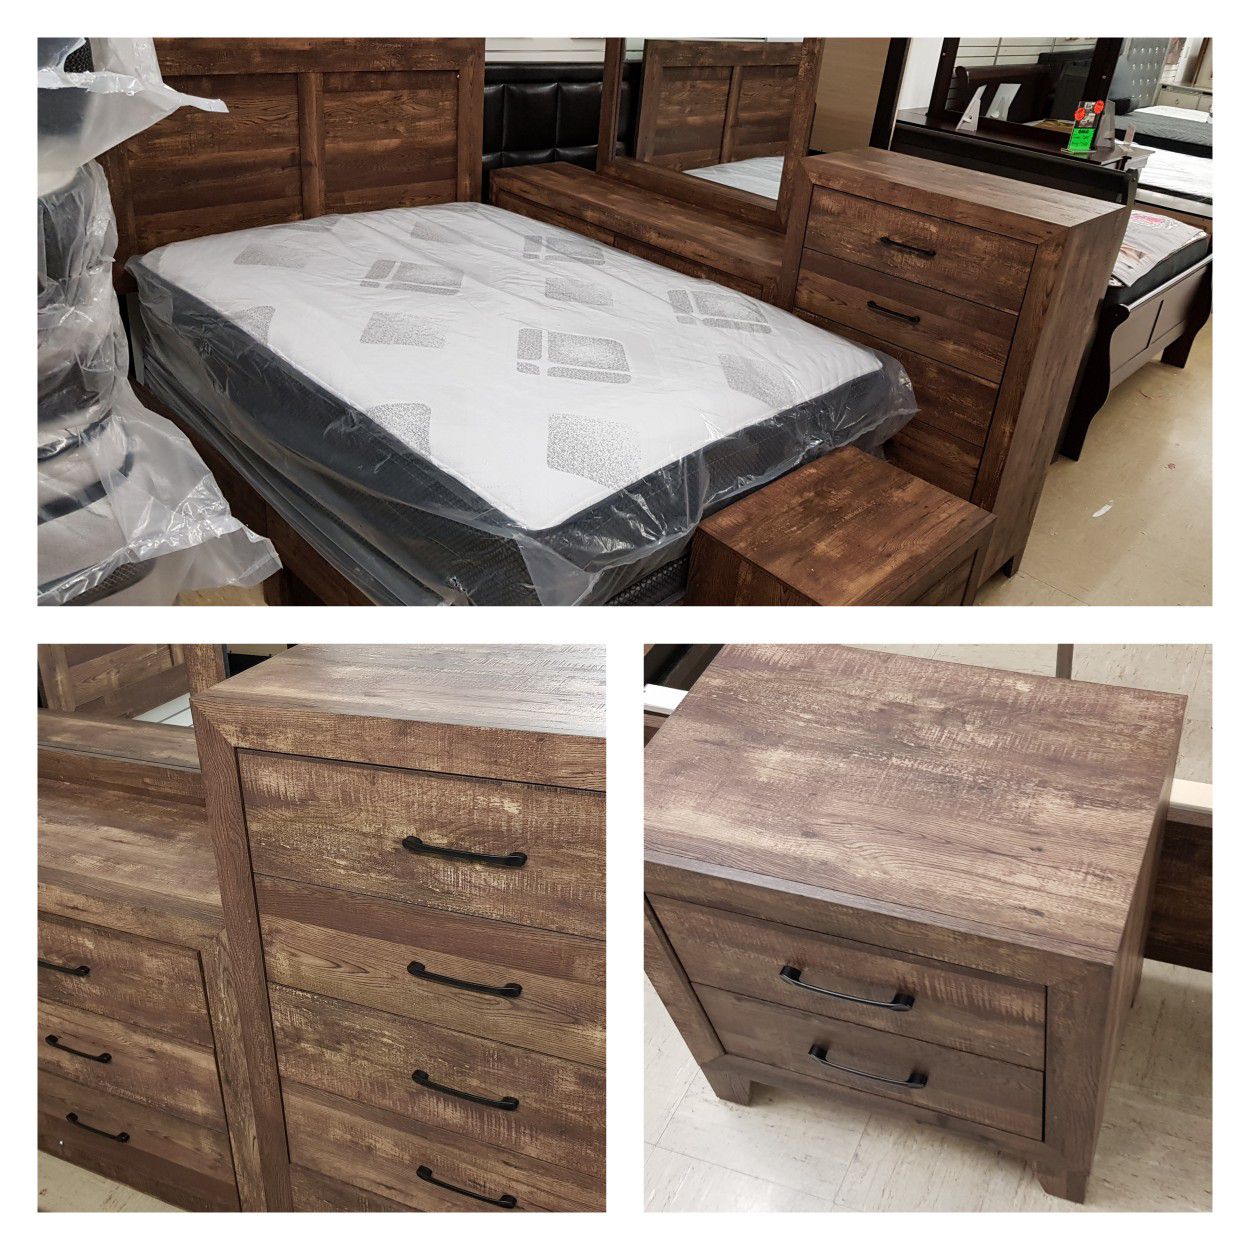 New Closeout 5 piece Bedroom Set - 90 Day Same As Cash